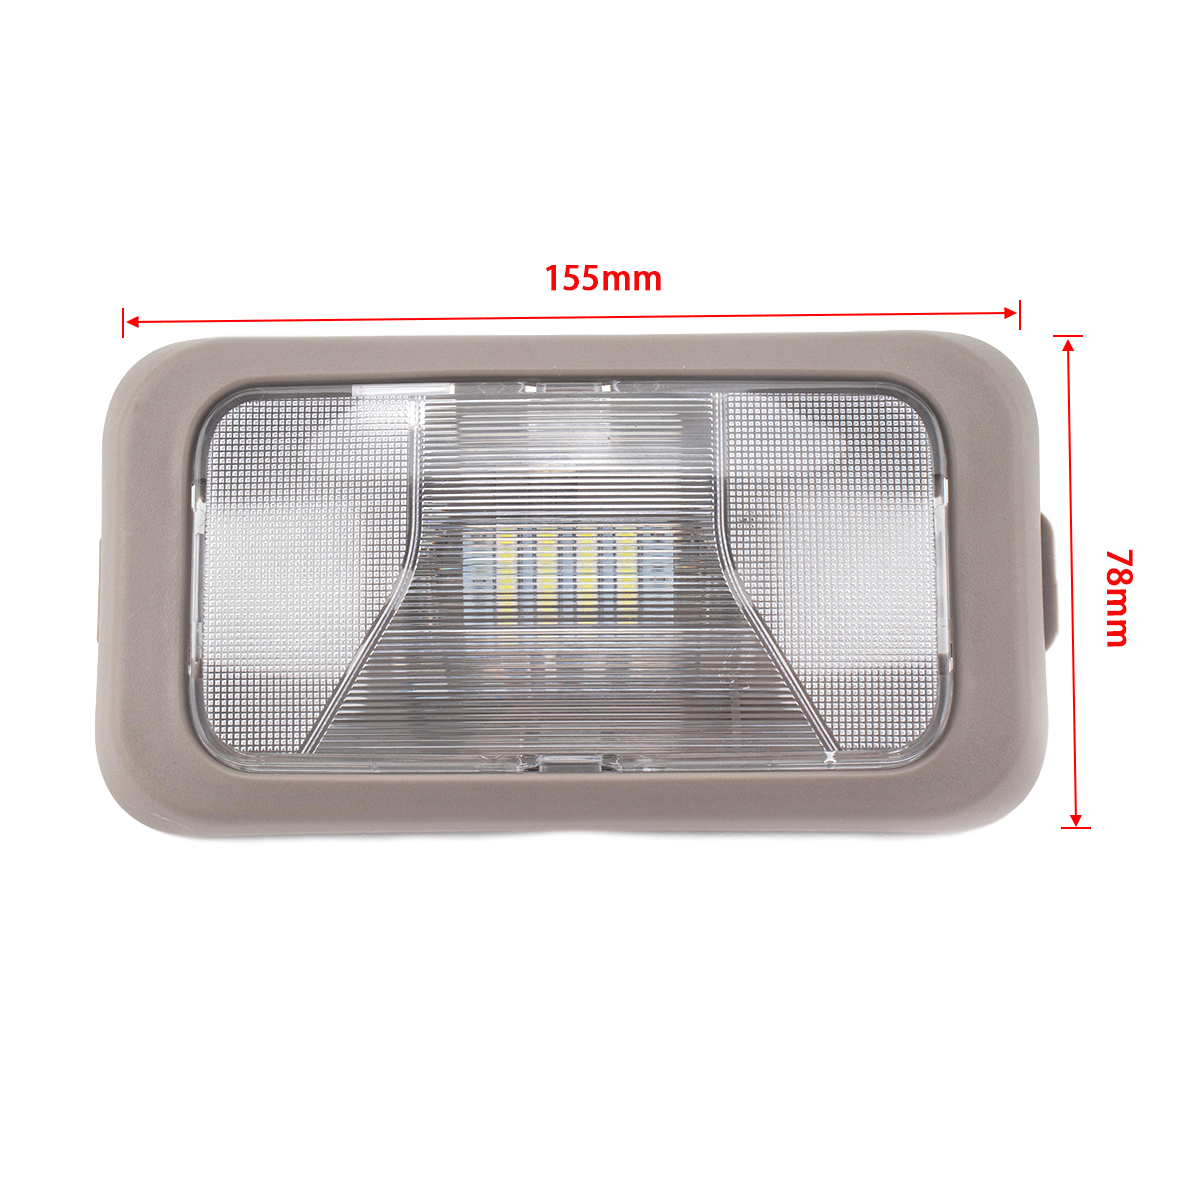 Car Roof LED Headlights Rust and Corrosion Resistance Car Accessories for Chevrolet Beige+white_LED car lights